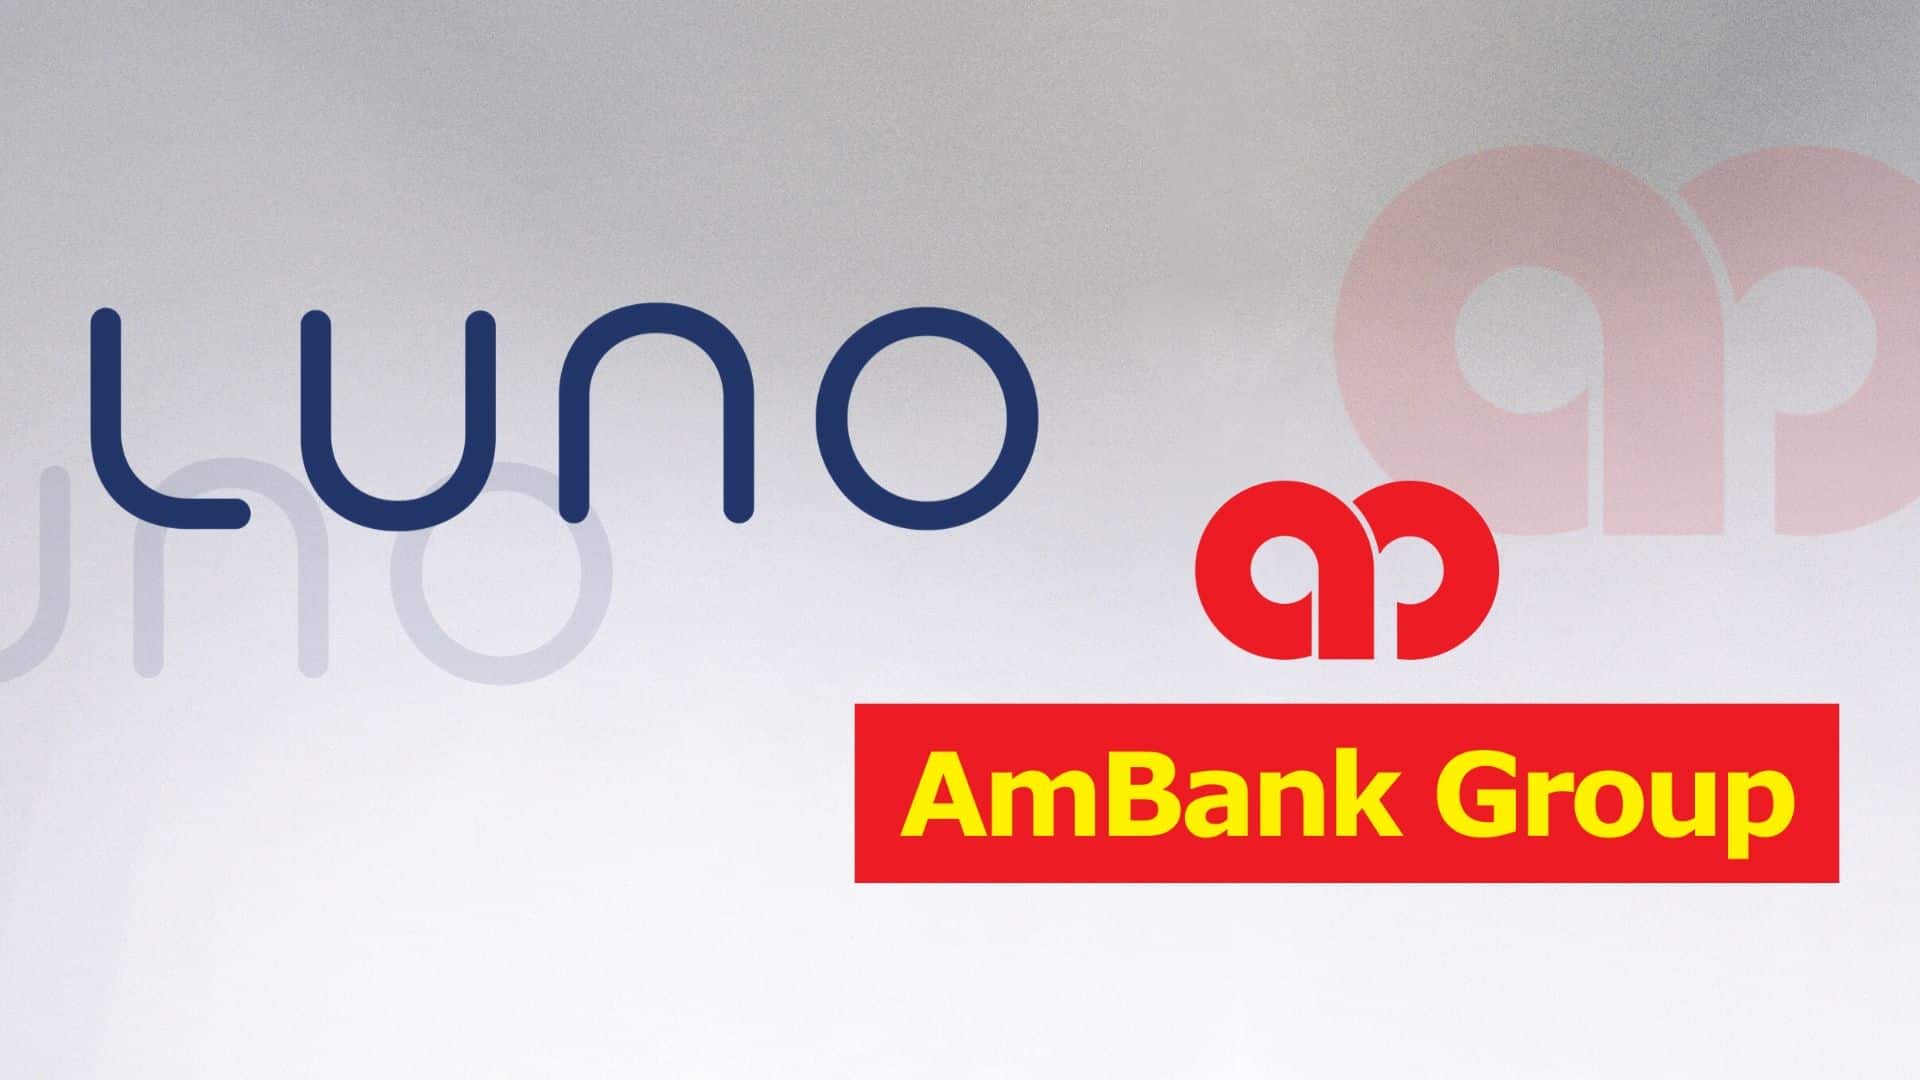 Luno Appoints Ambank as Primary Banker